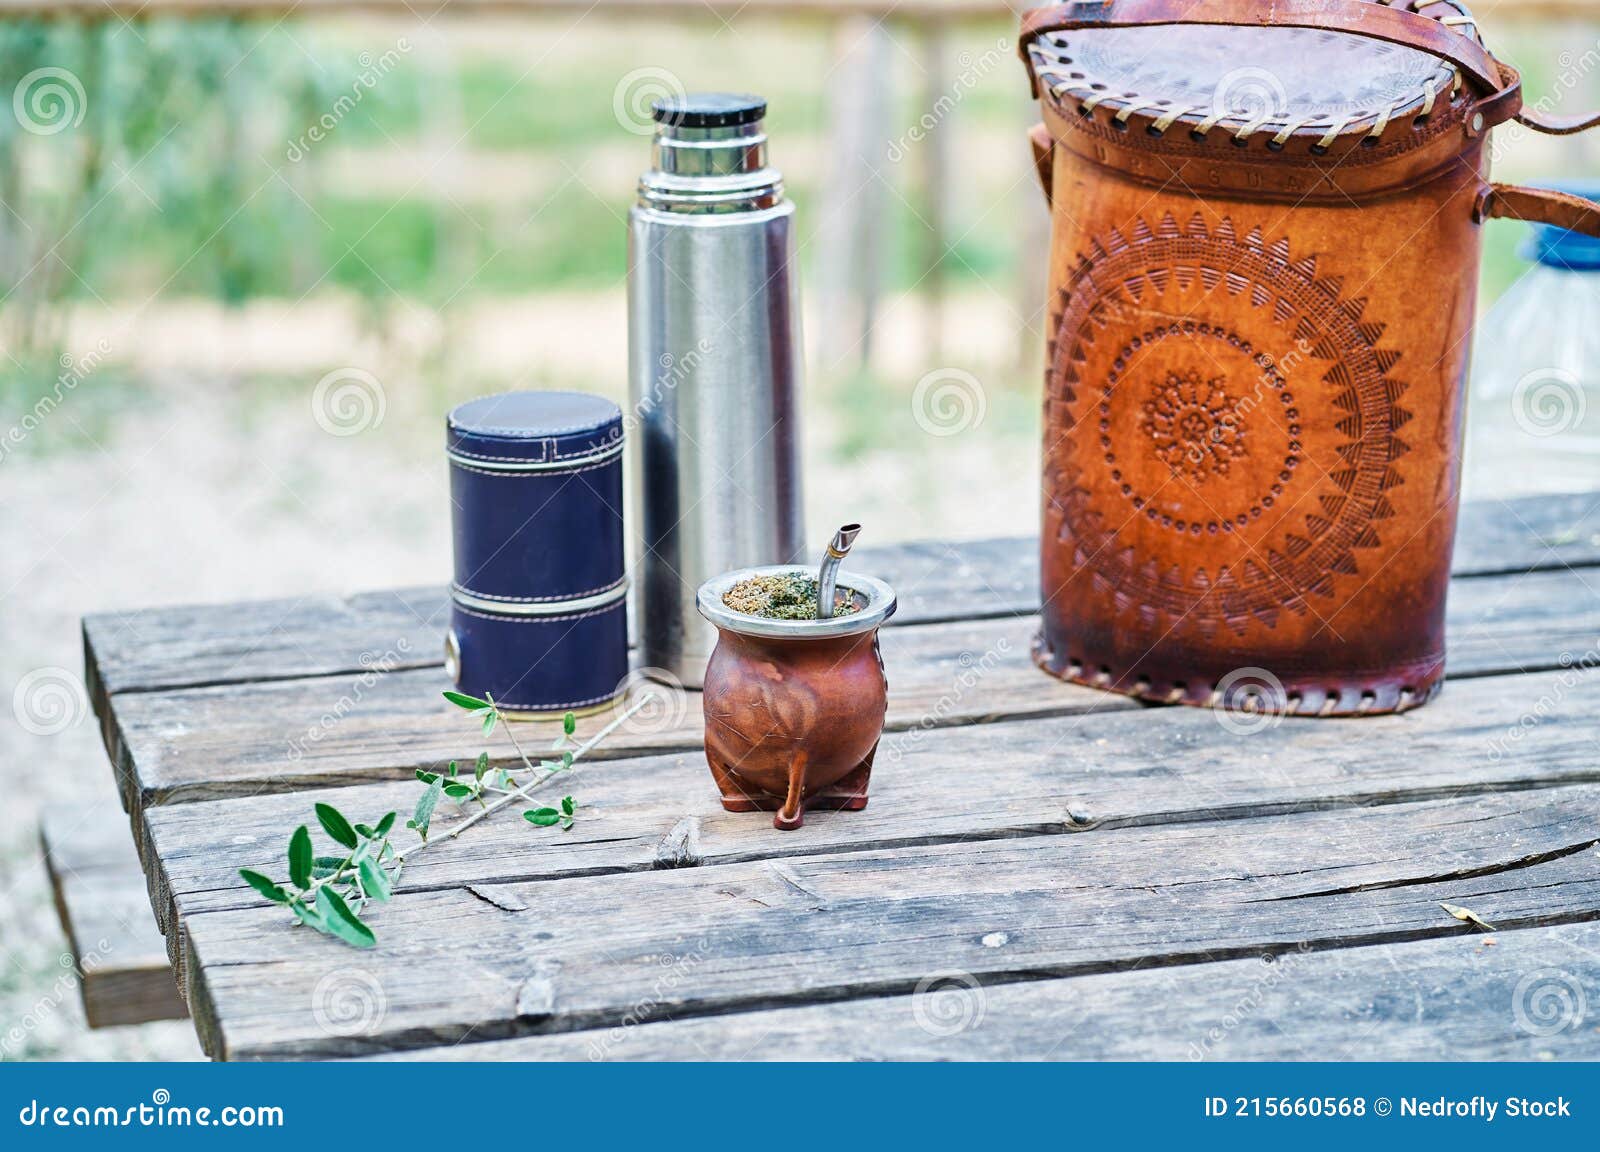 Mate Kit Lined in Leather, with the Light Bulb, Thermos and Bag on a Wooden  Table in the Countryside Stock Photo - Image of paraguay, herbal: 215660568